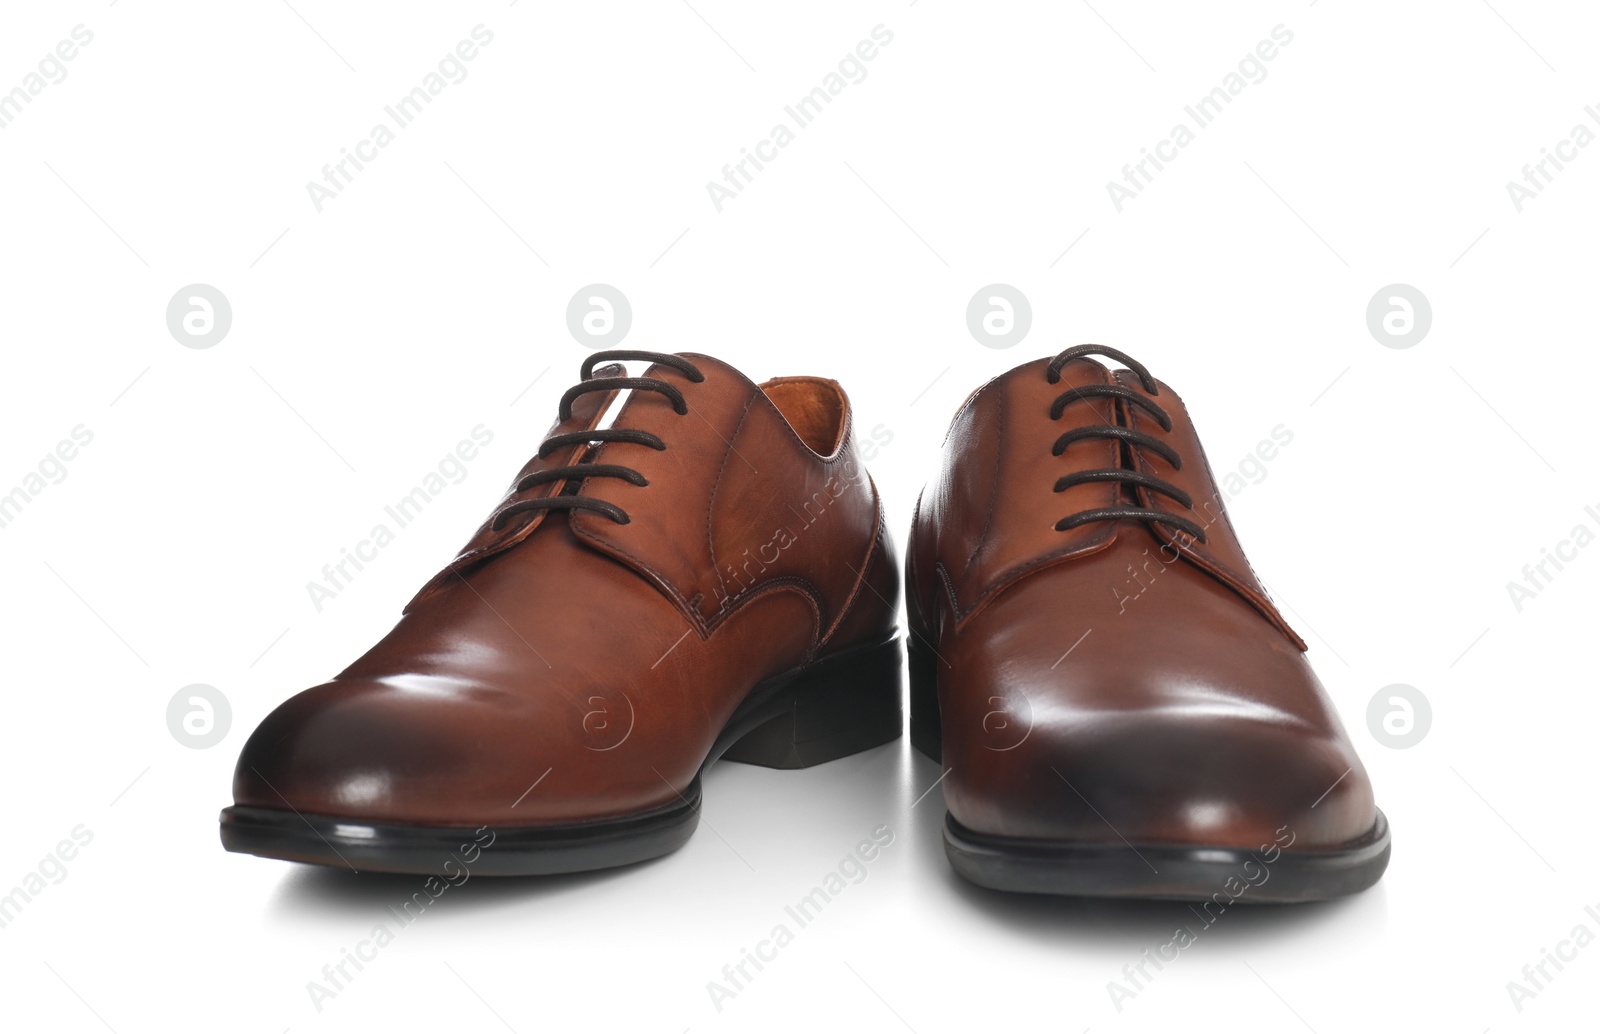 Photo of Classic wedding shoes for groom on white background